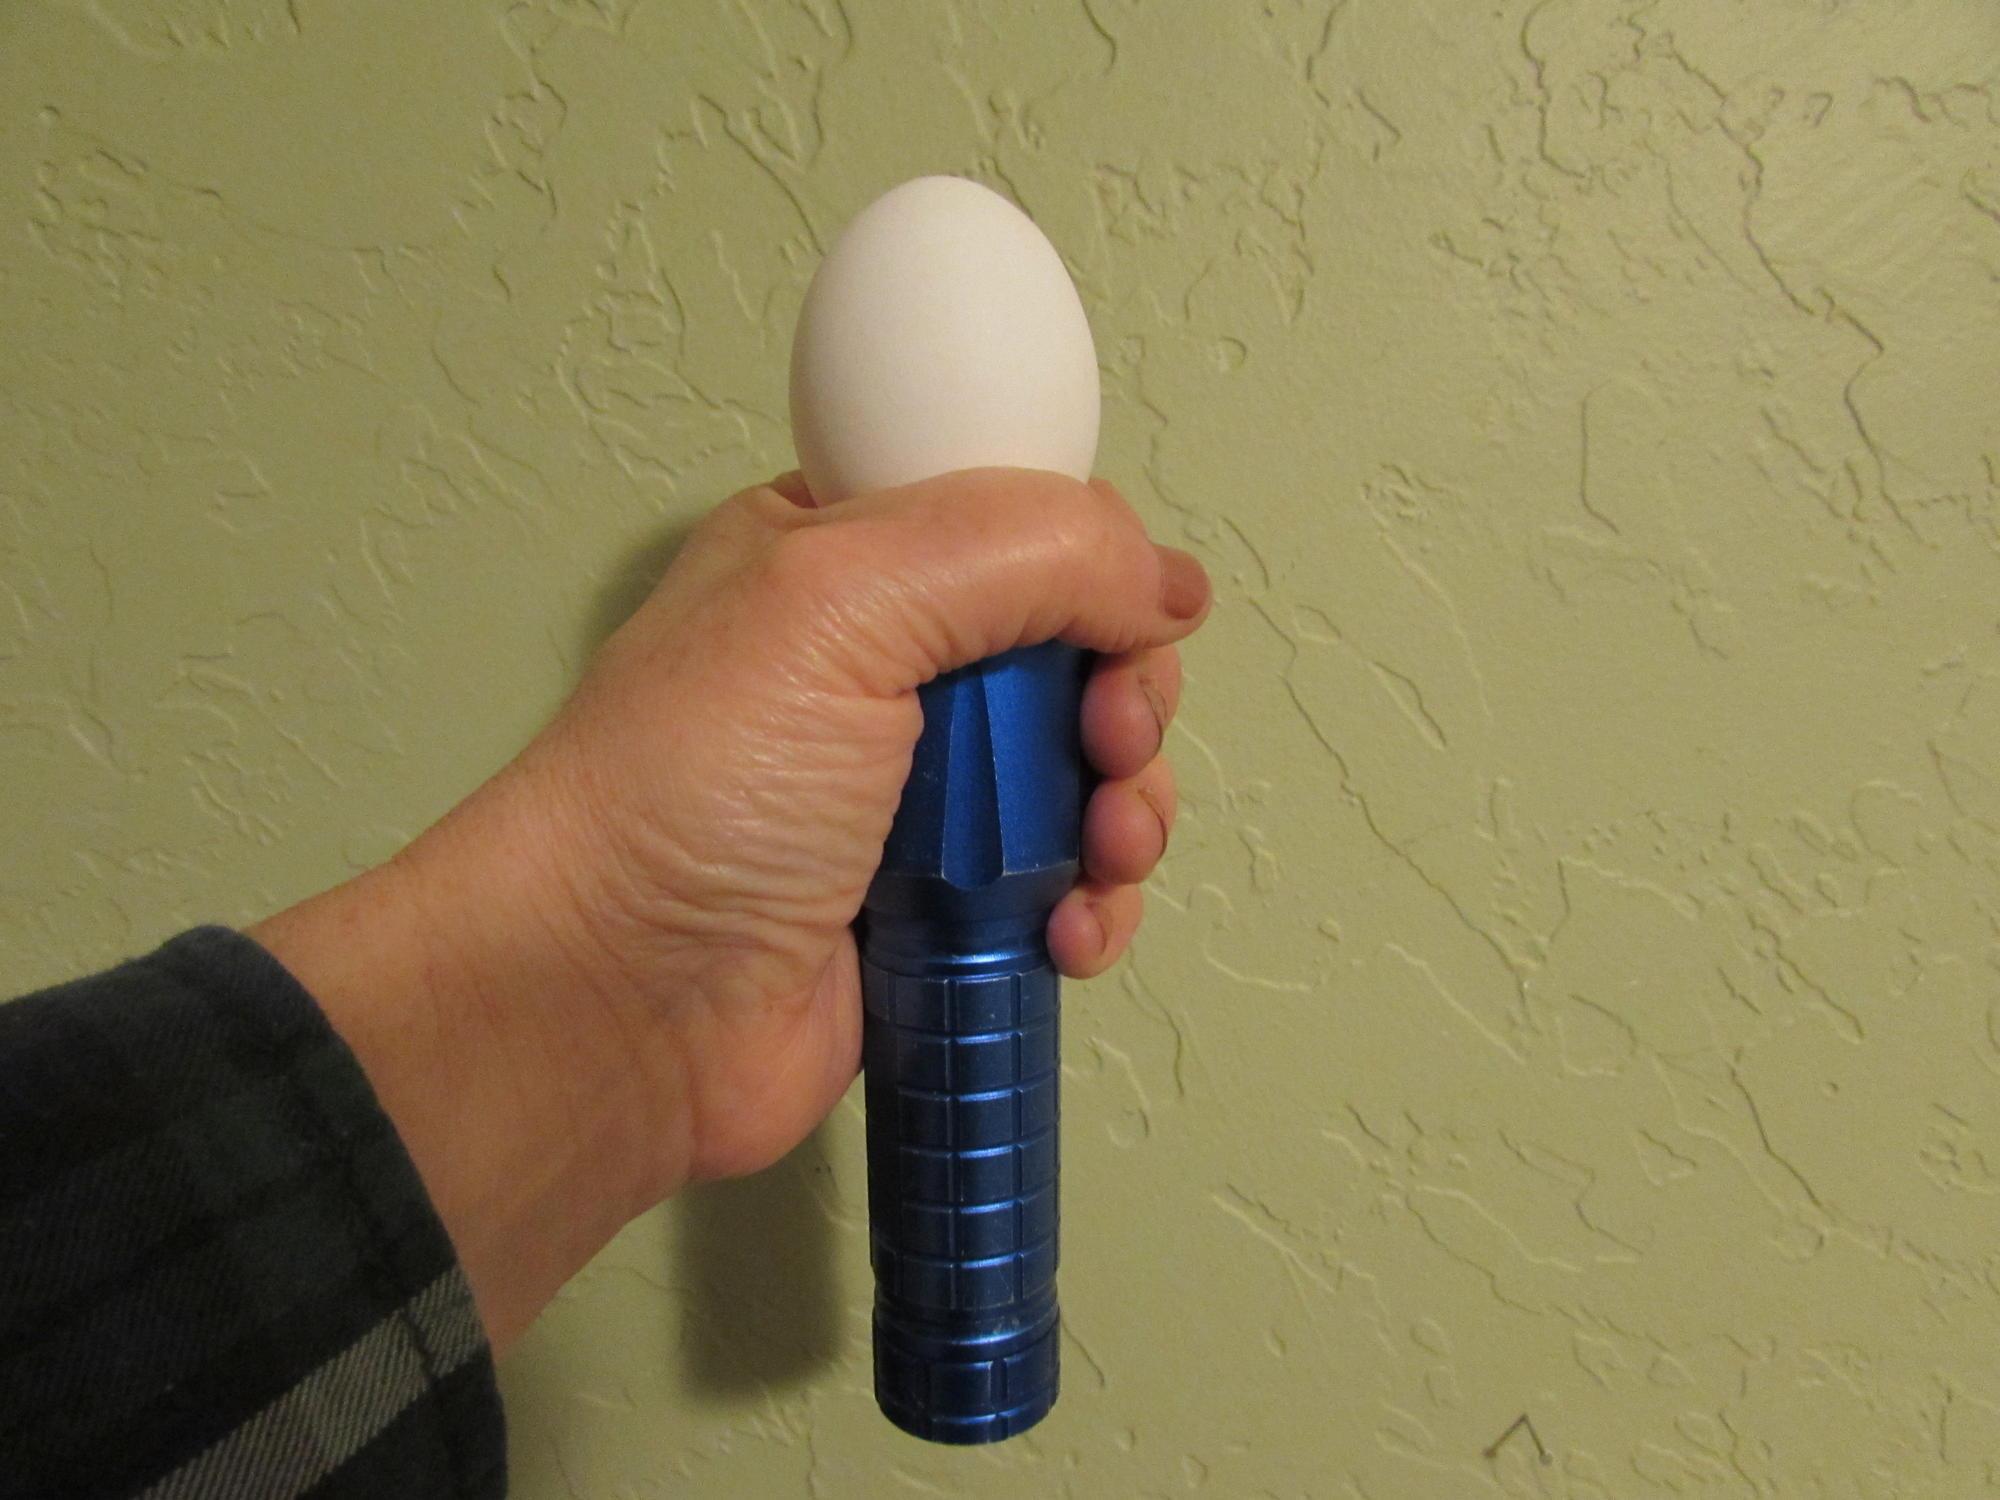 A person holds an egg directly atop a flashlight.